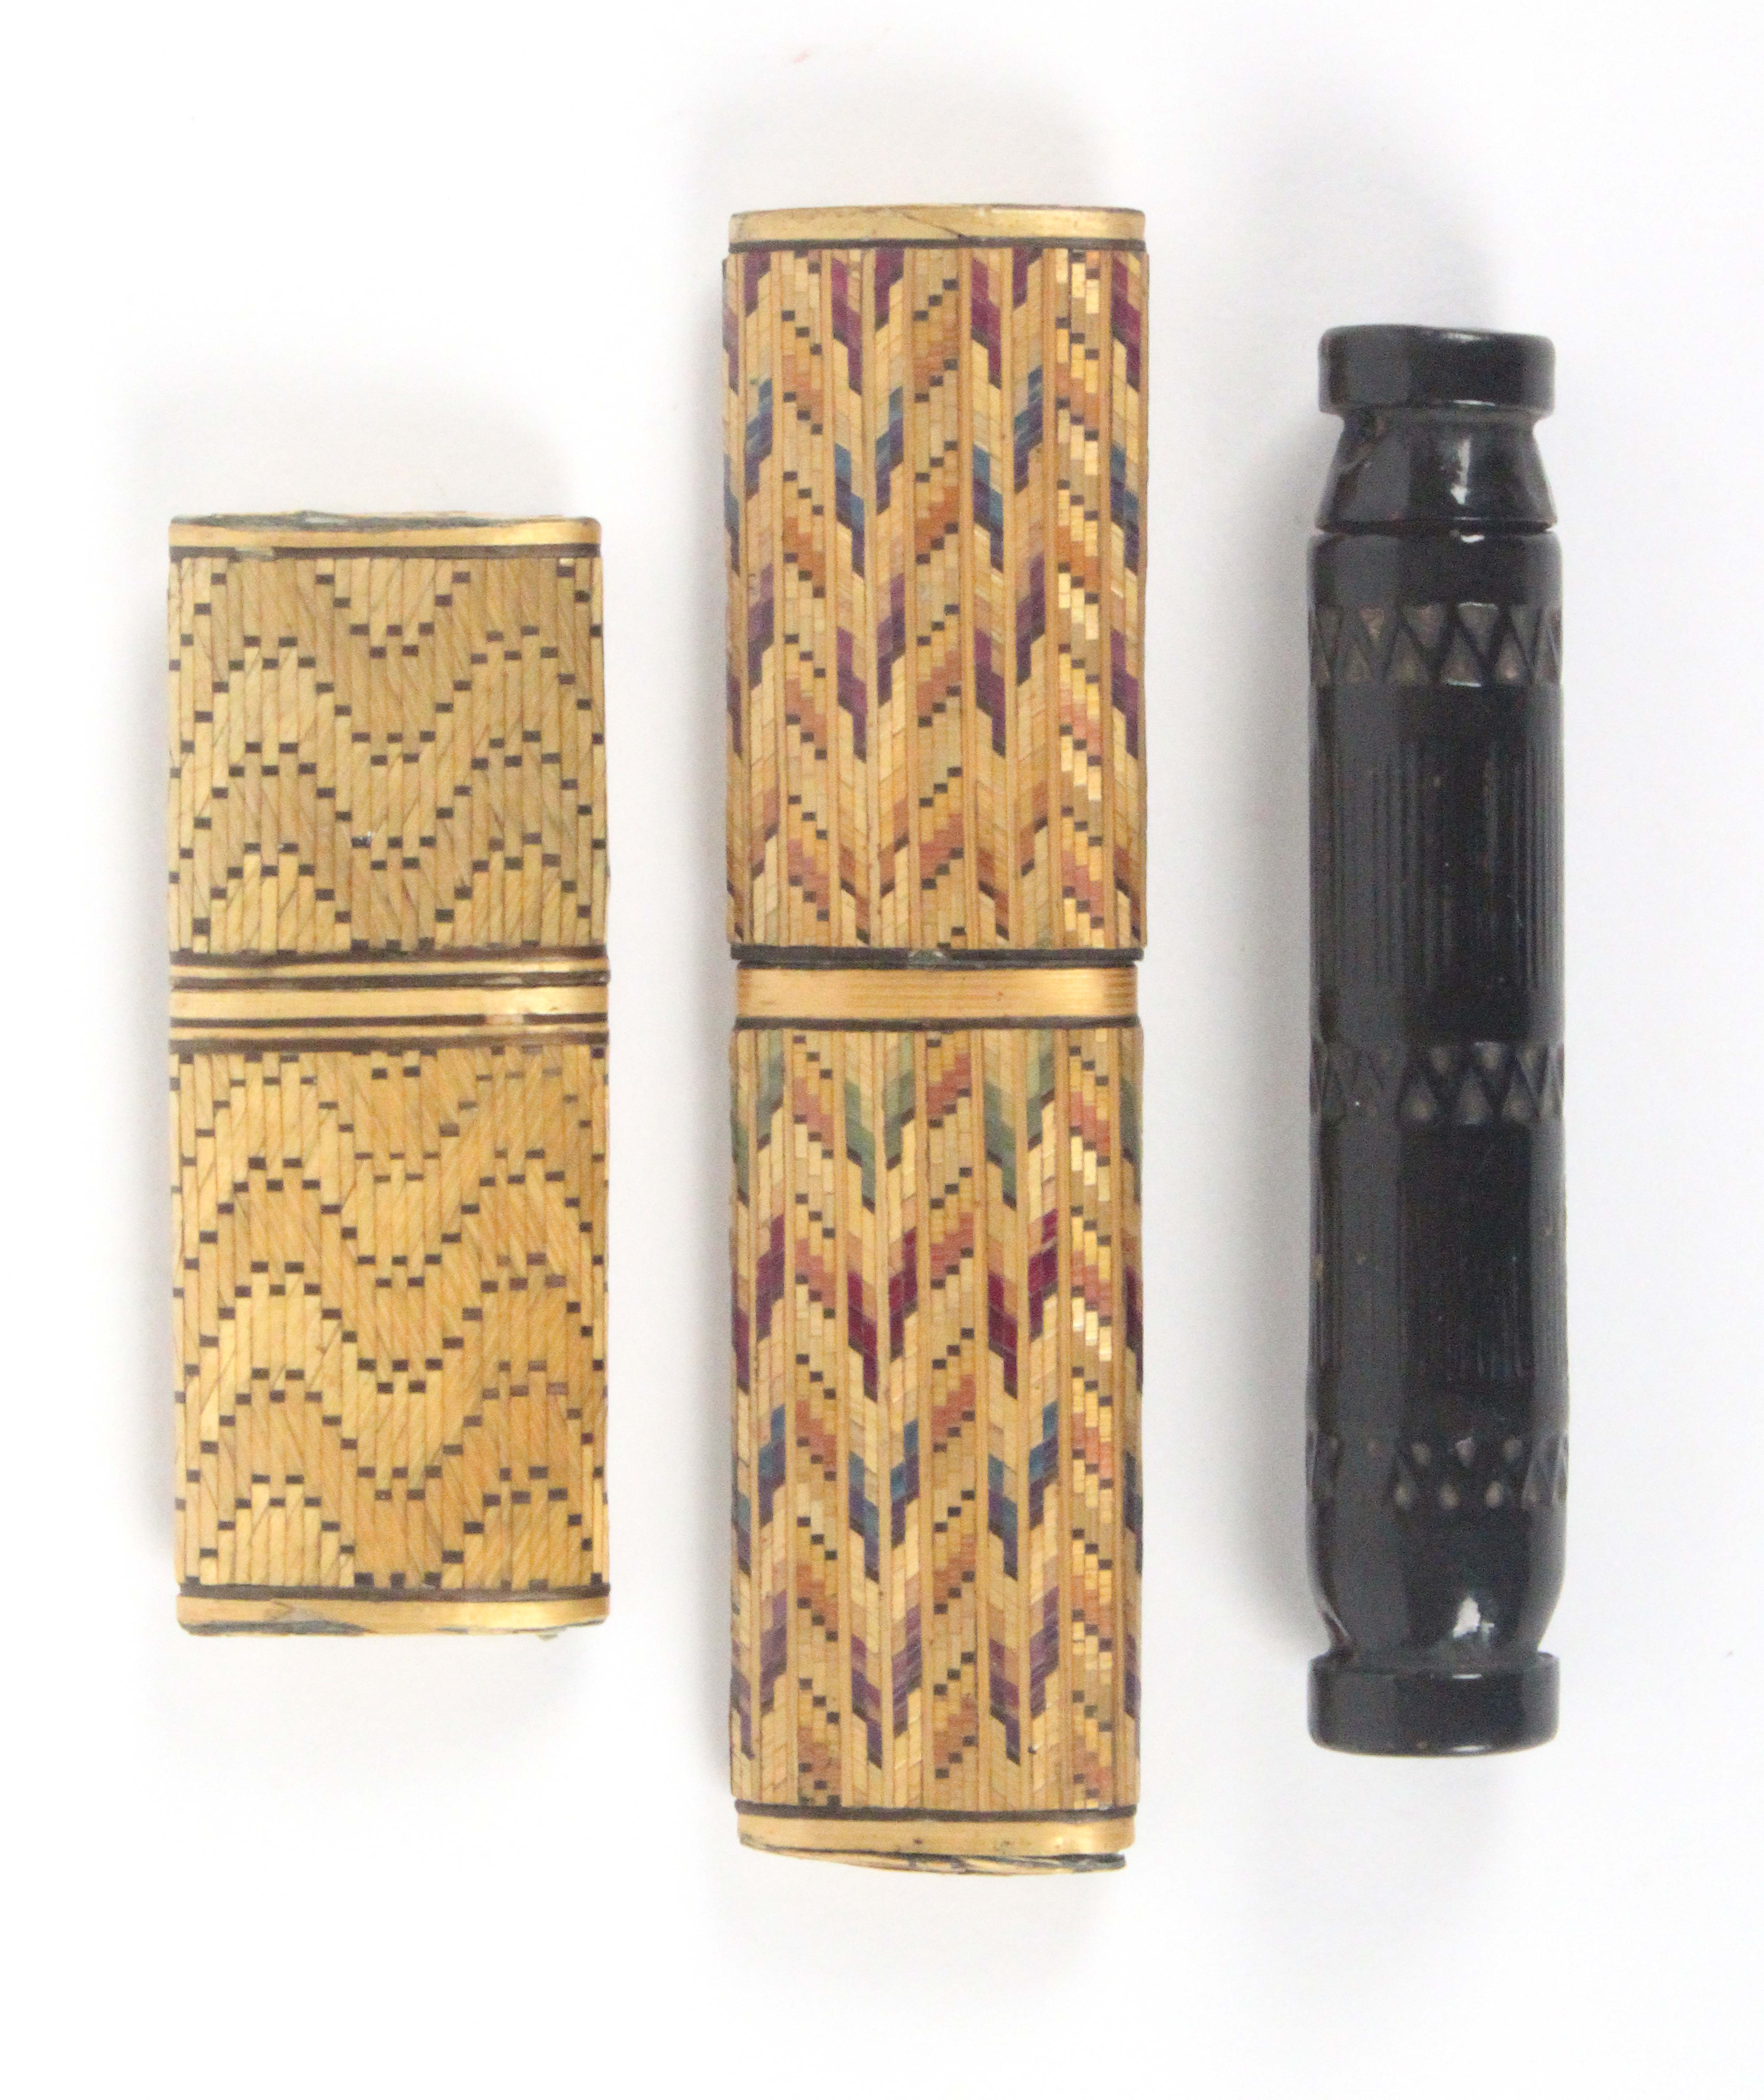 Two straw work needle cases and a wooden example, the straw work examples of oval section covered in